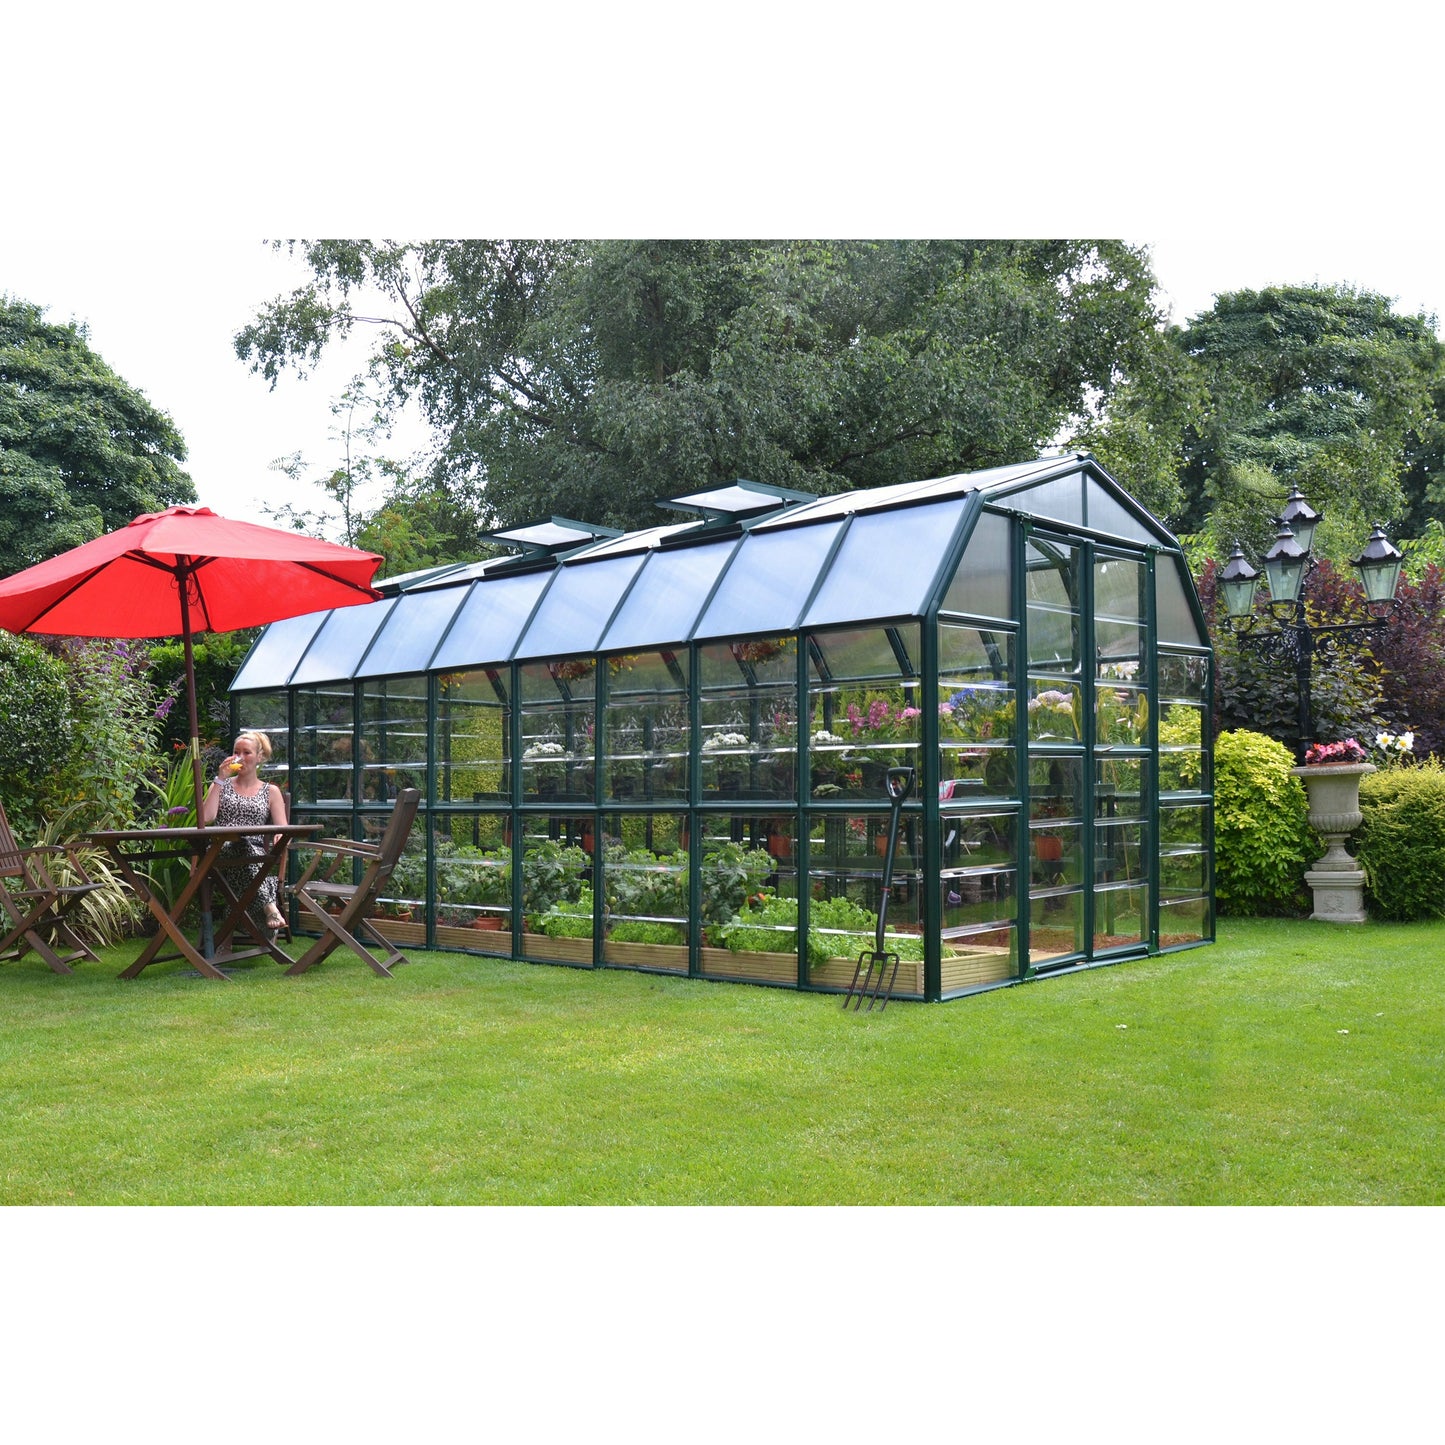 Rion Grand Gardener 8' x 16' Greenhouse - Clear